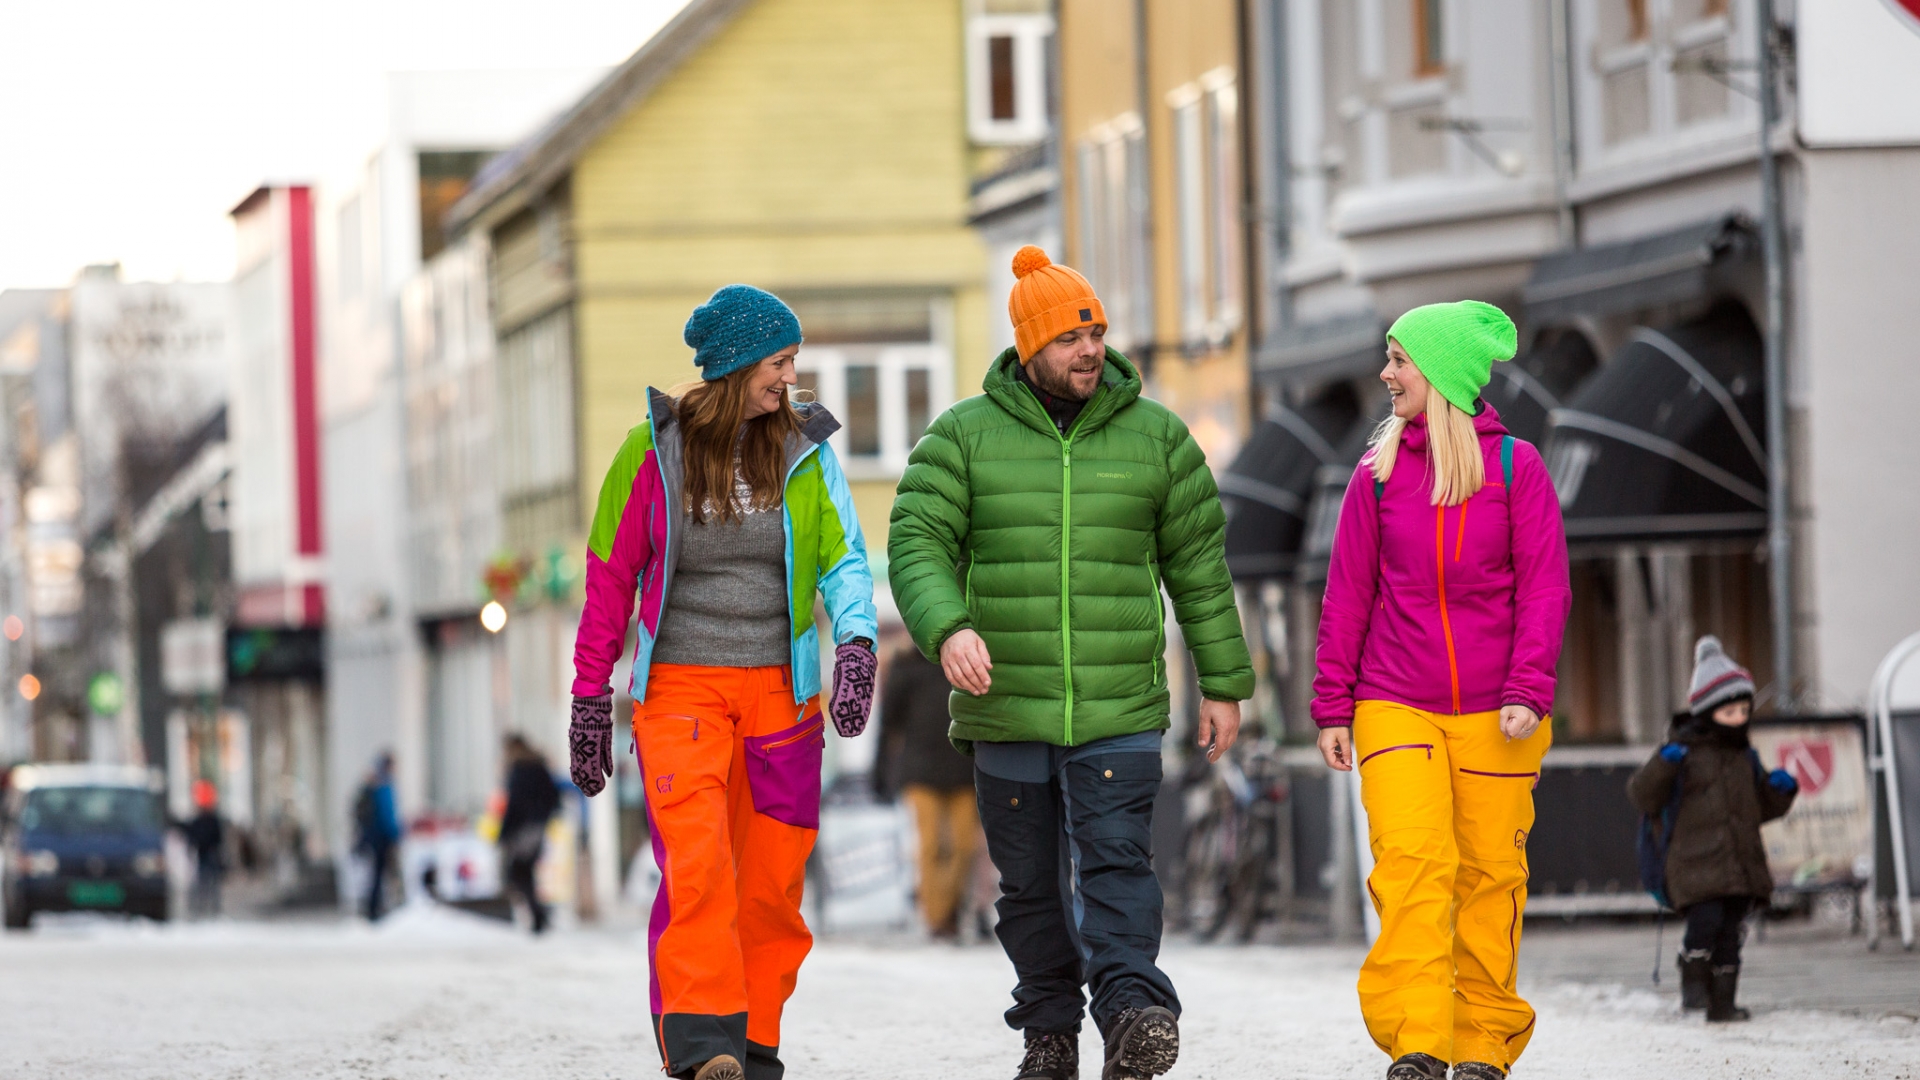 People in winter clothing